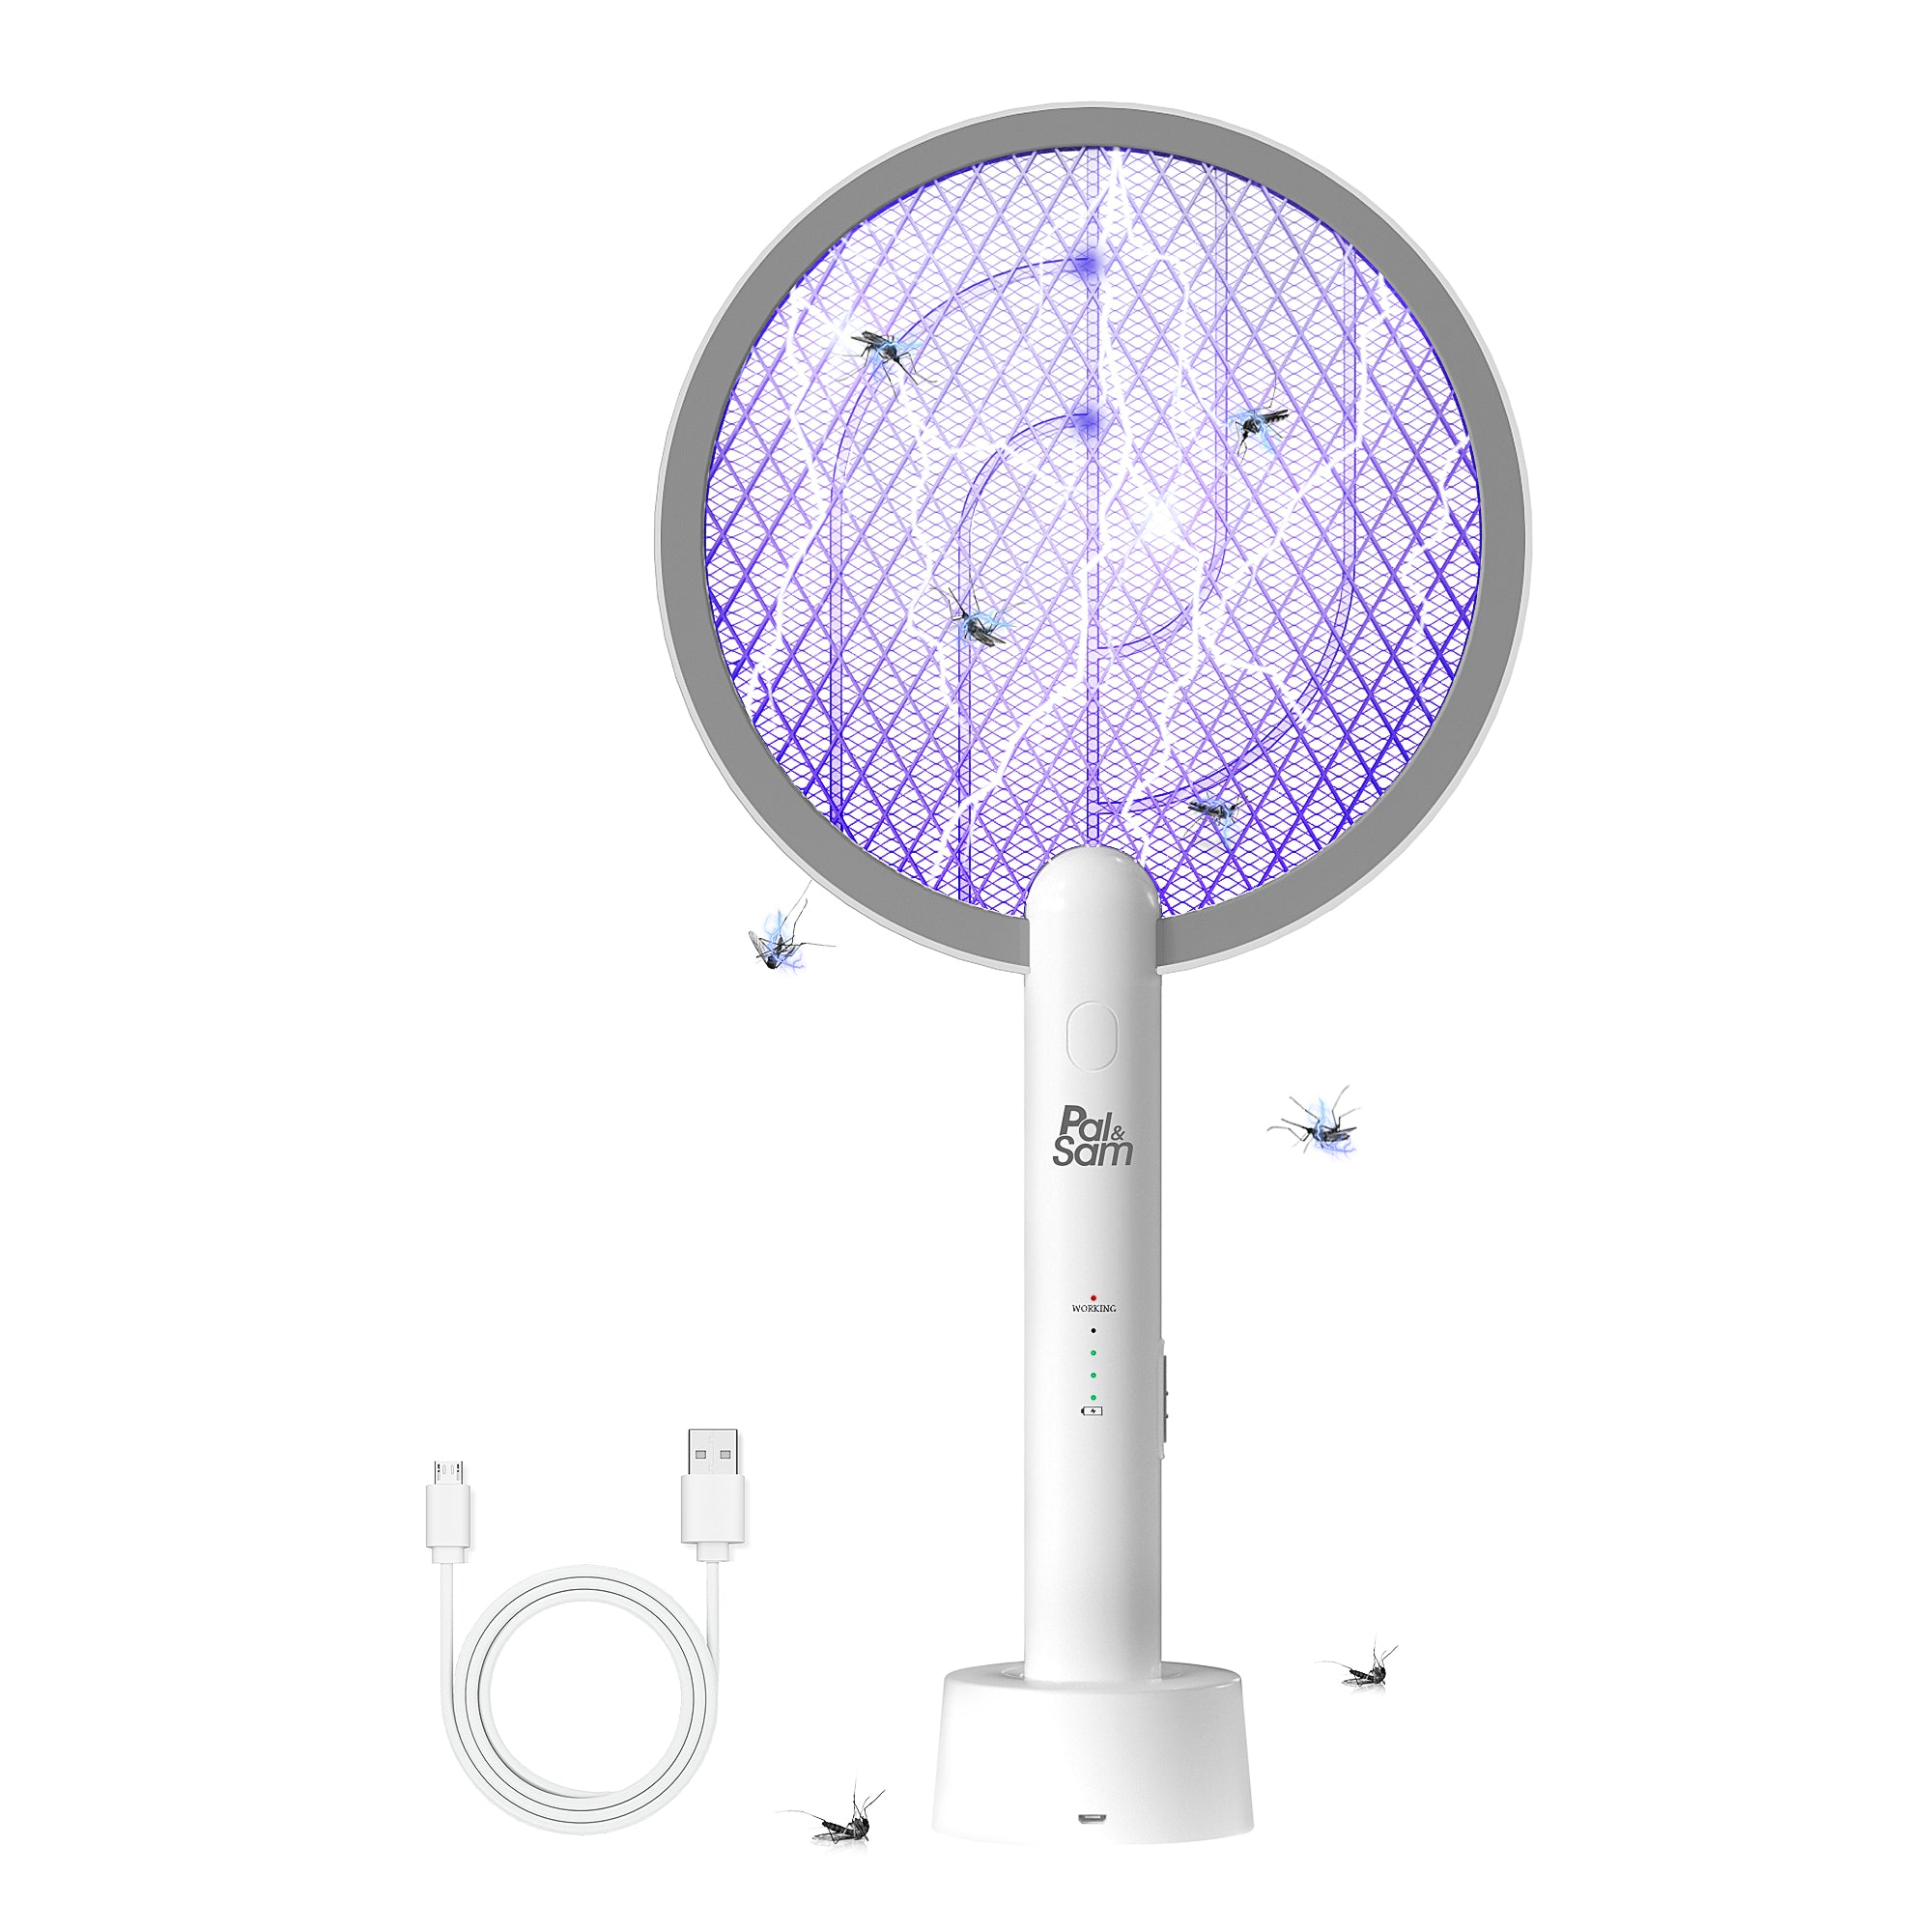 PAL&SAM Electric Fly Swatter Racket